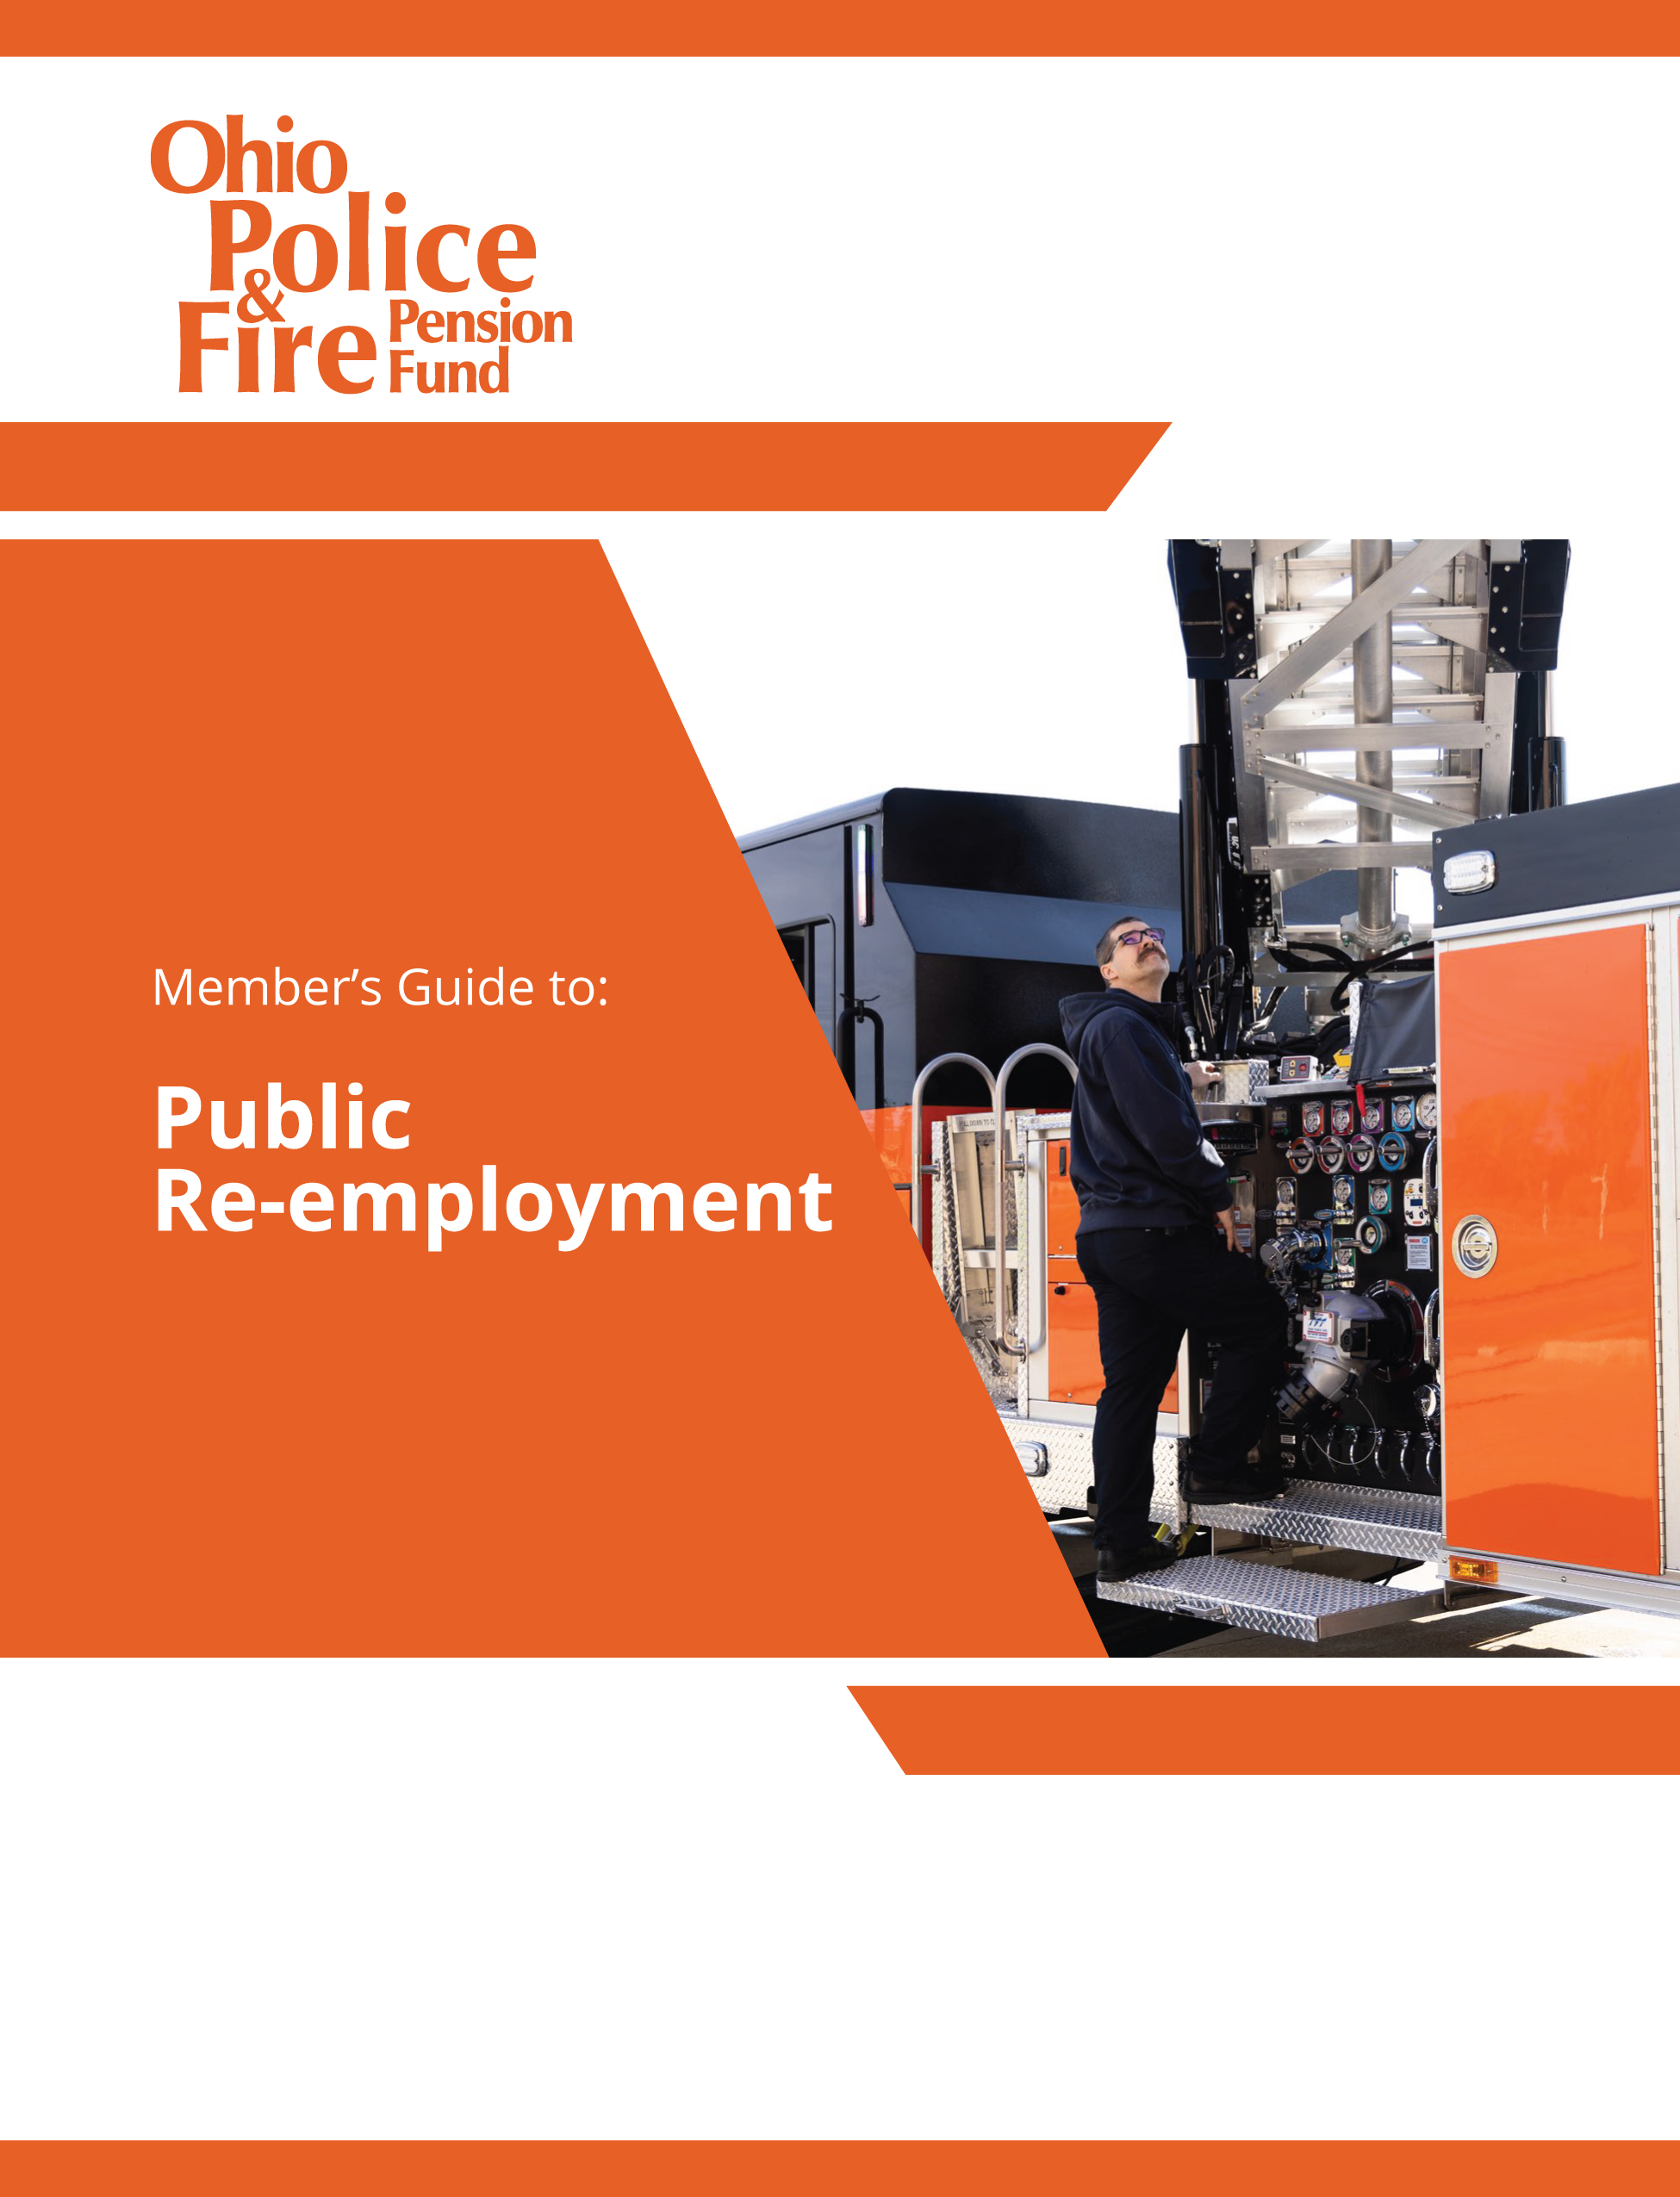 Members' Guide to Public Re-employment